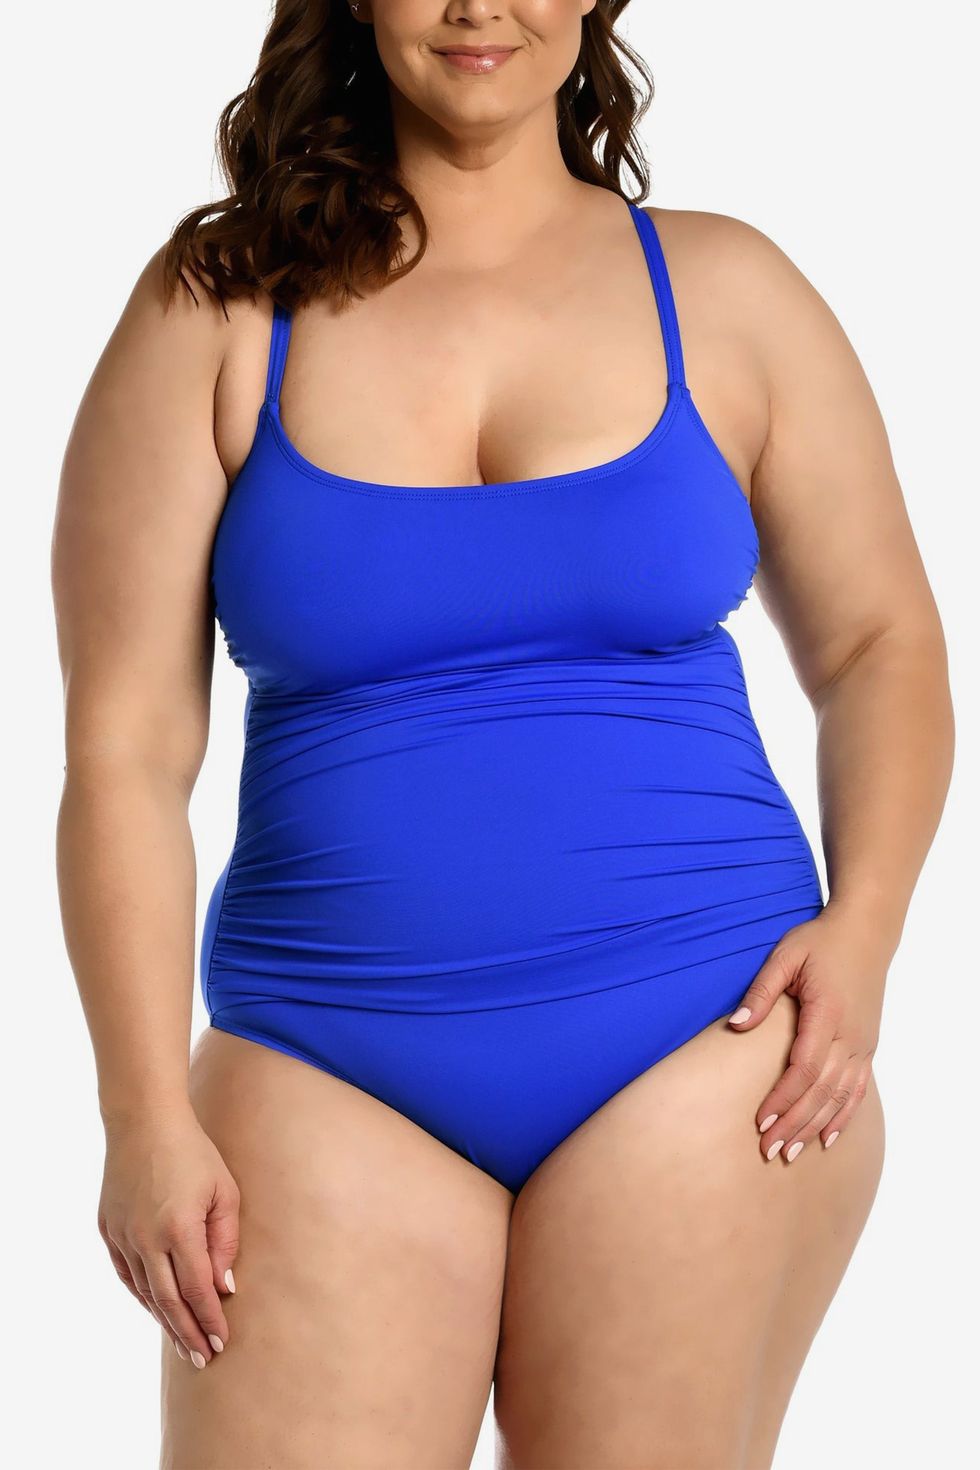 Sports Swimwear with Support for Large Busts